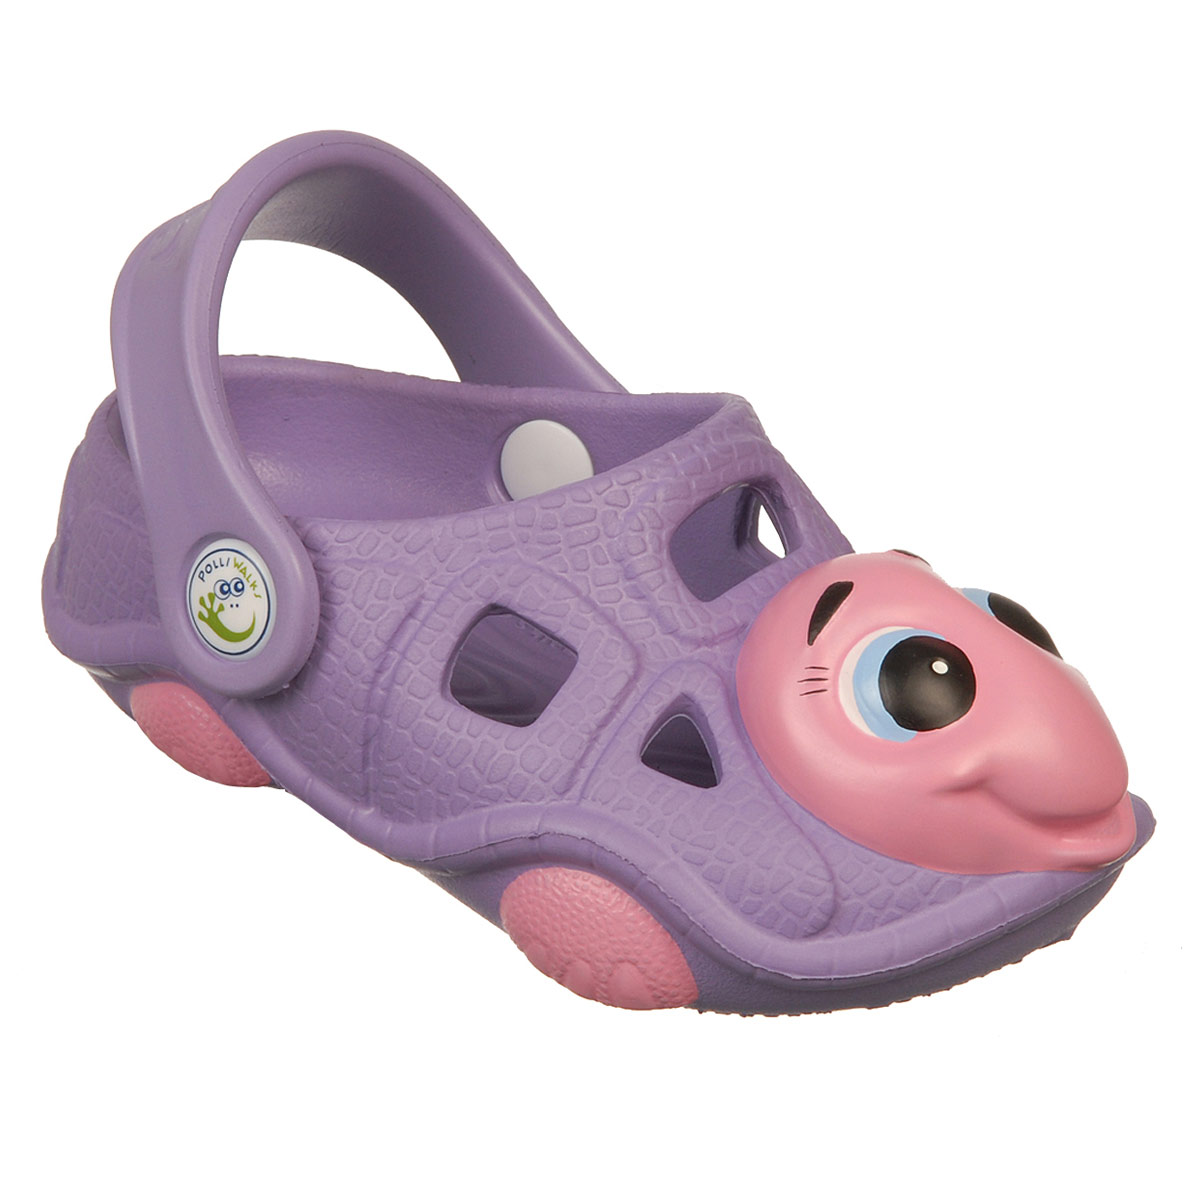 Polliwalks : Toddler shoes Tory  the Turtle  Purple # 12